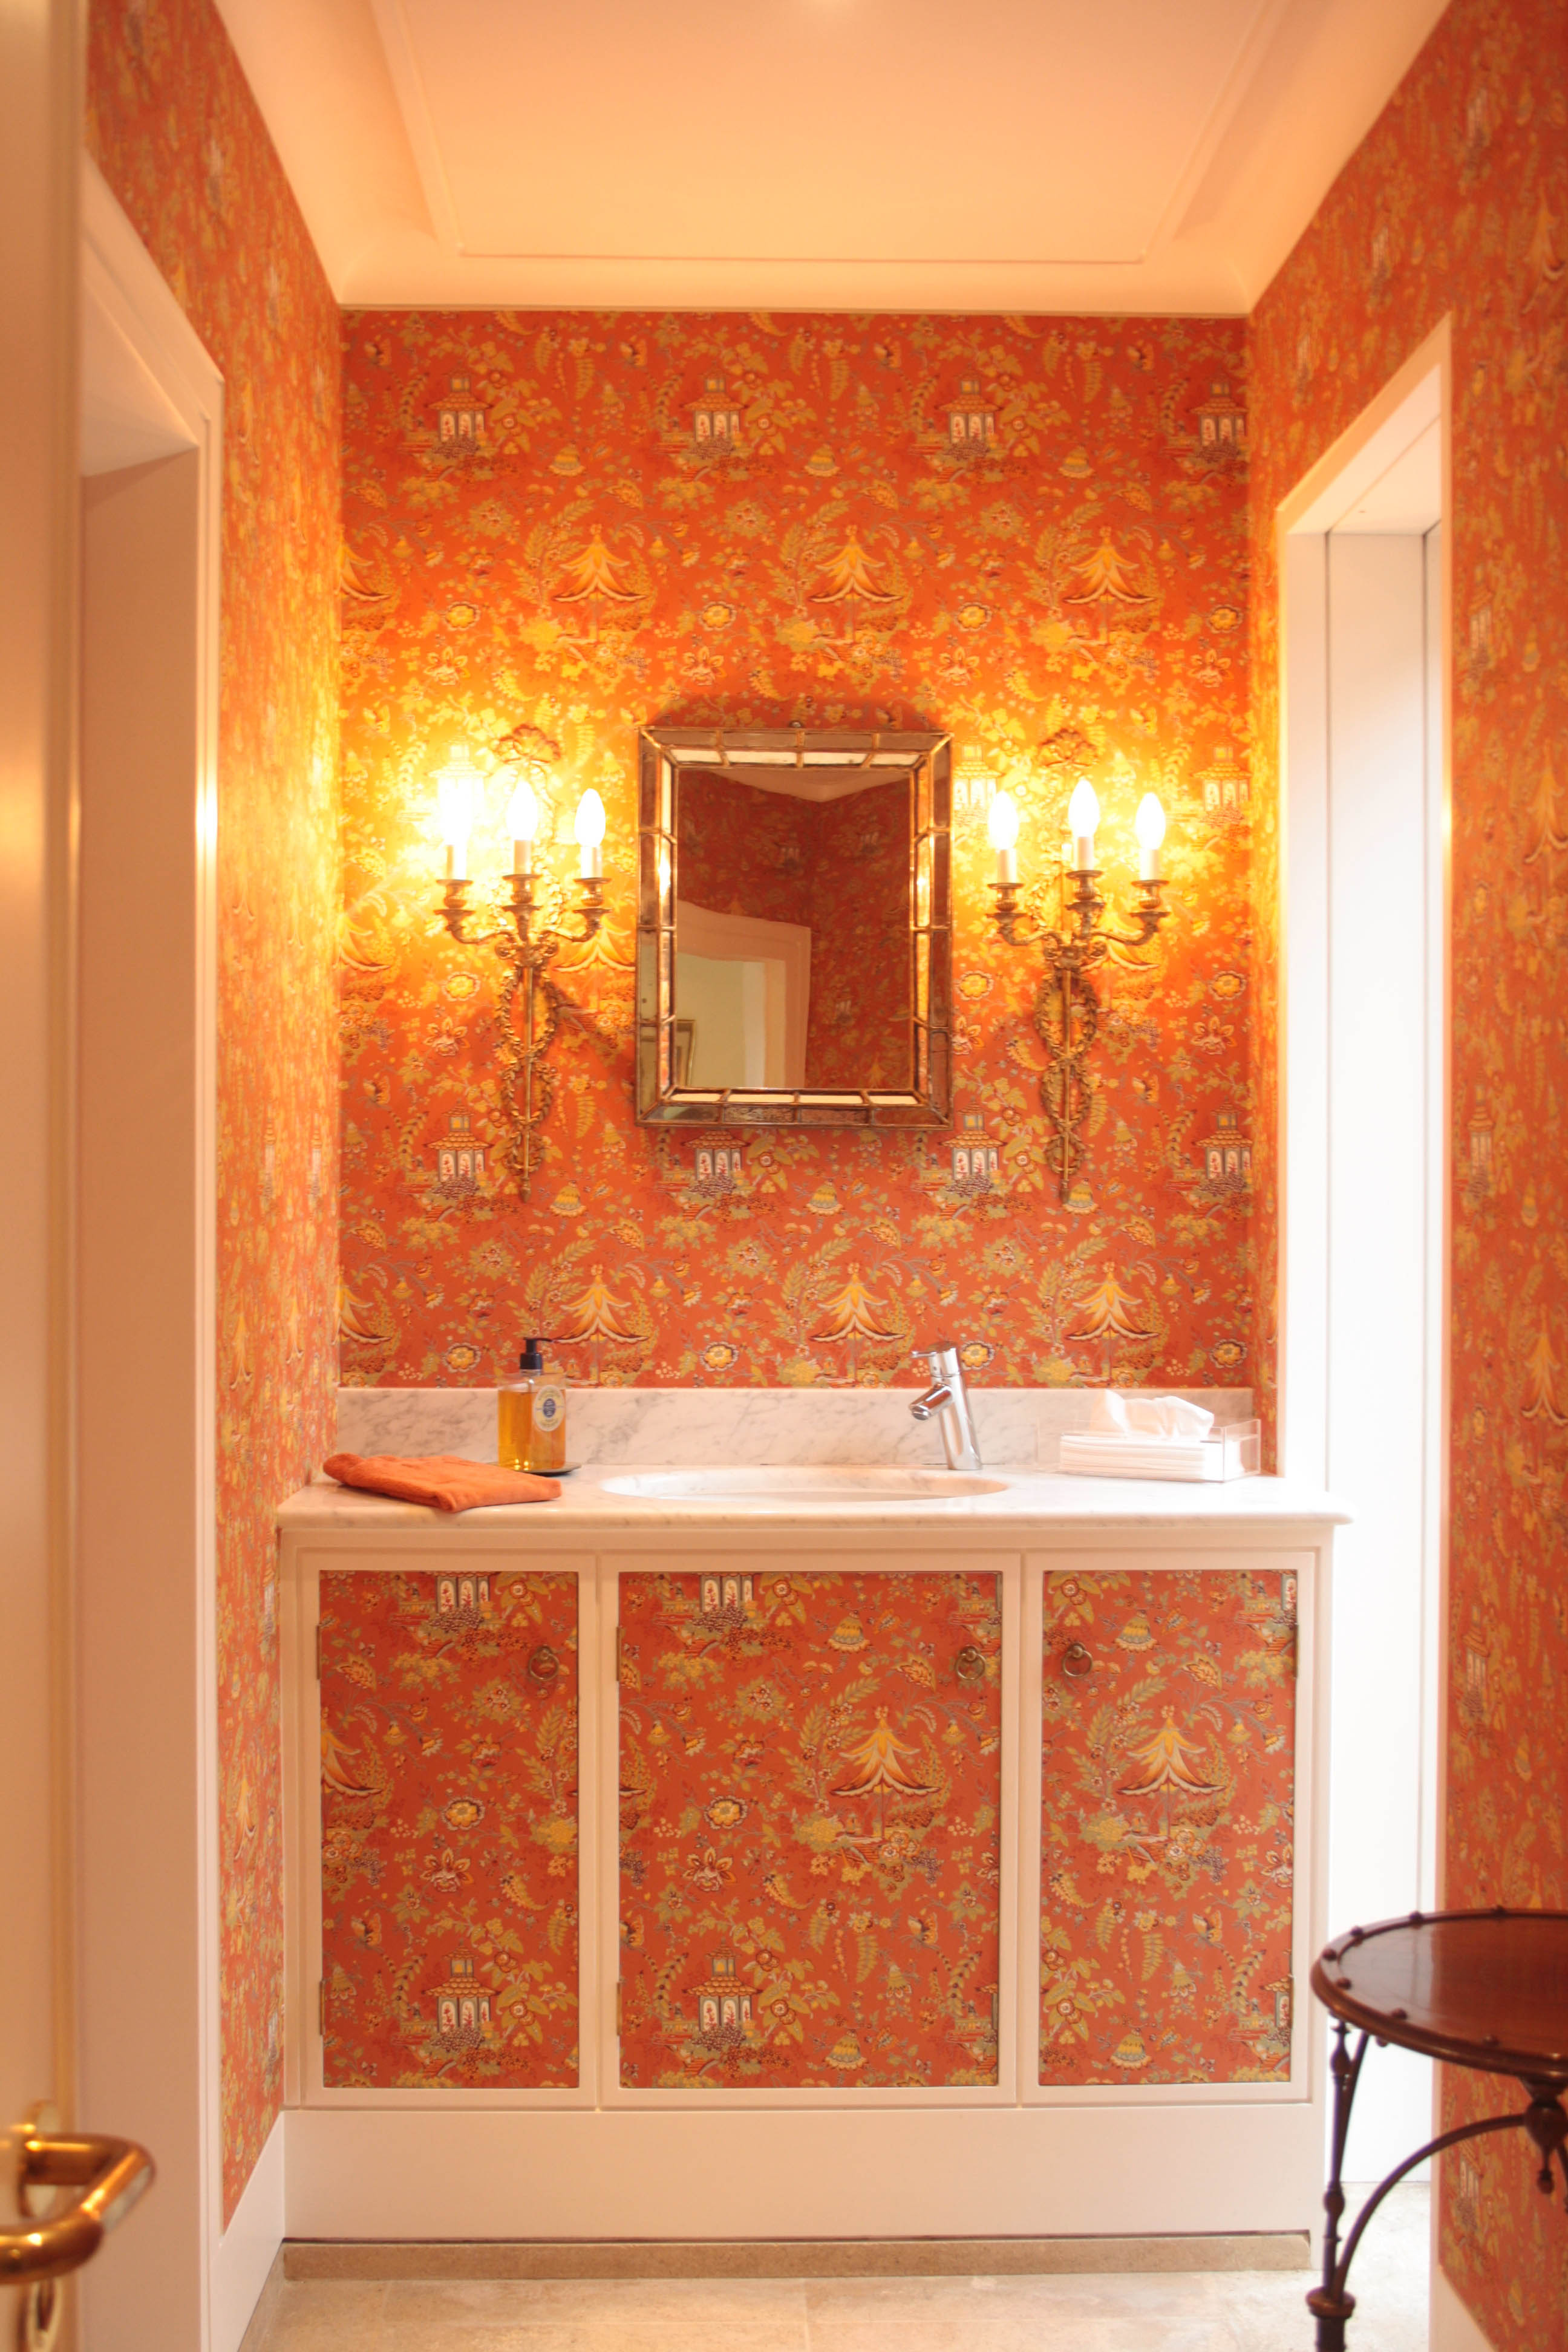 The Cloakroom's burnt orange Chinoiserie wallpaper is freshened by the white bathroom marble